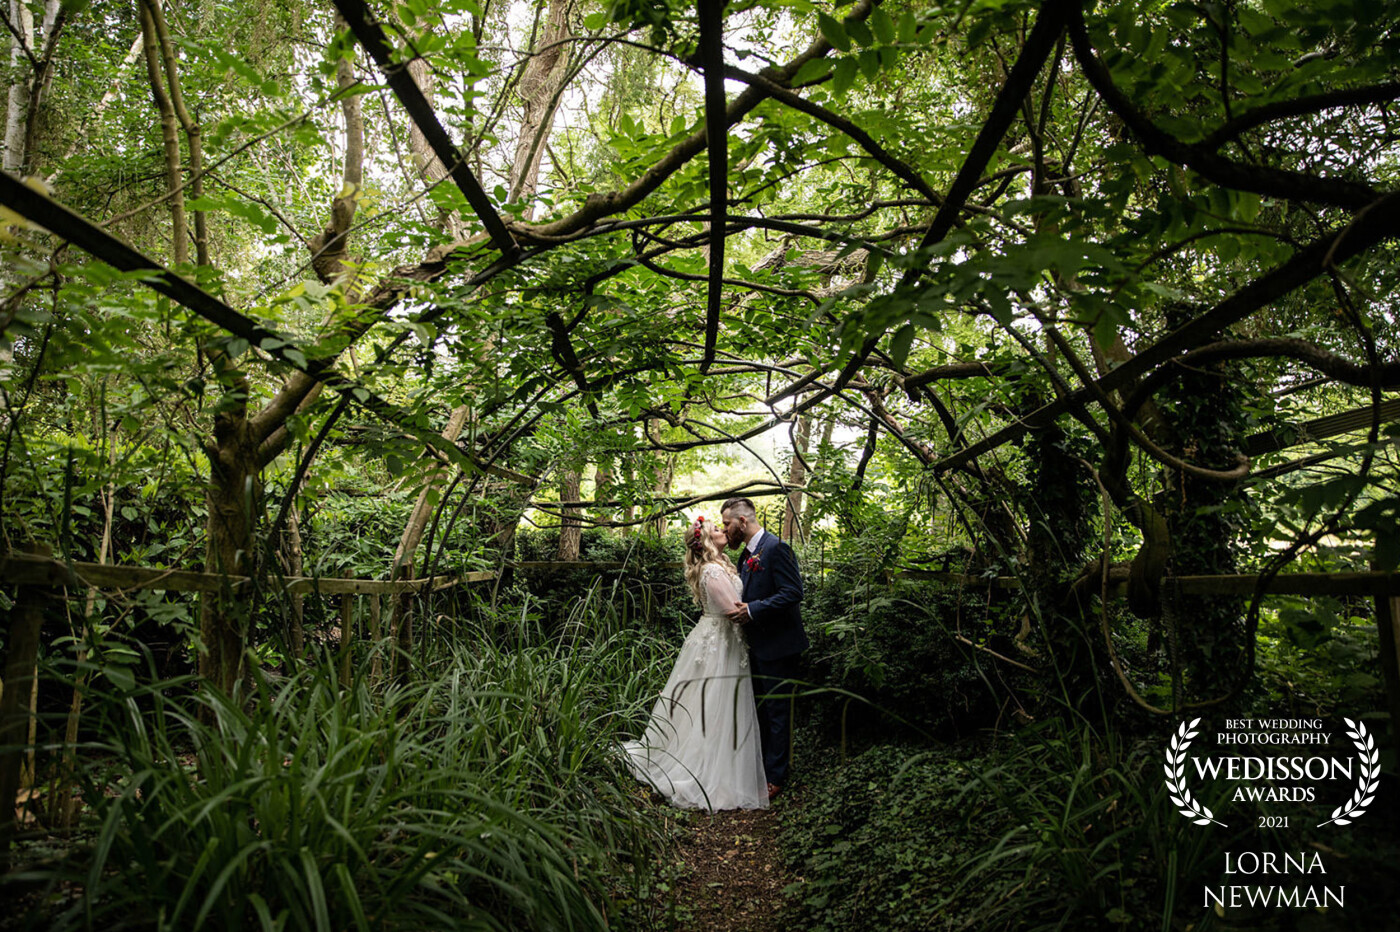 A Shot from Jessica & Sam's wedding in the Polytunnel at the beautiful Flaxbourne Gardens, this time of year it is covered in Wisteria and looks absolutely enchanting so we had to pop in for a shot.